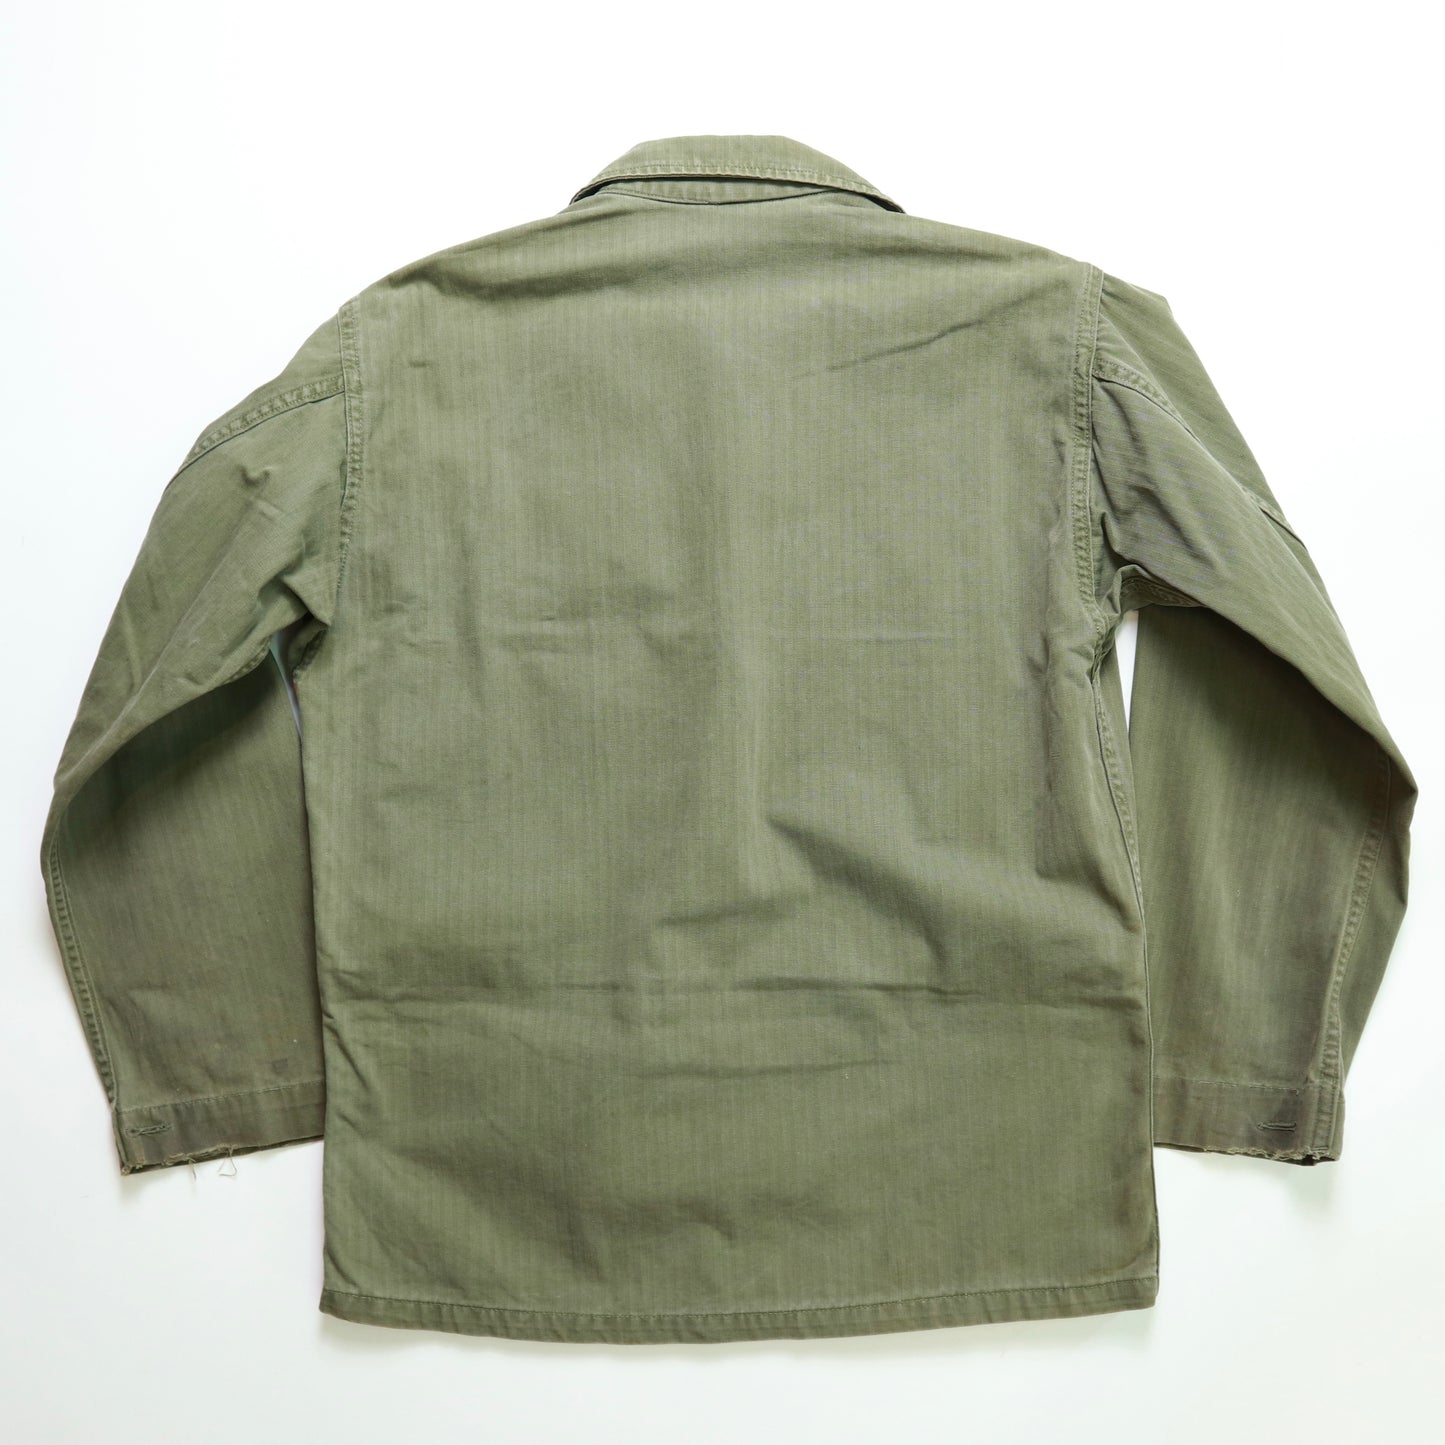 1940's U.S. military issued M43 type2 HBT JACKET